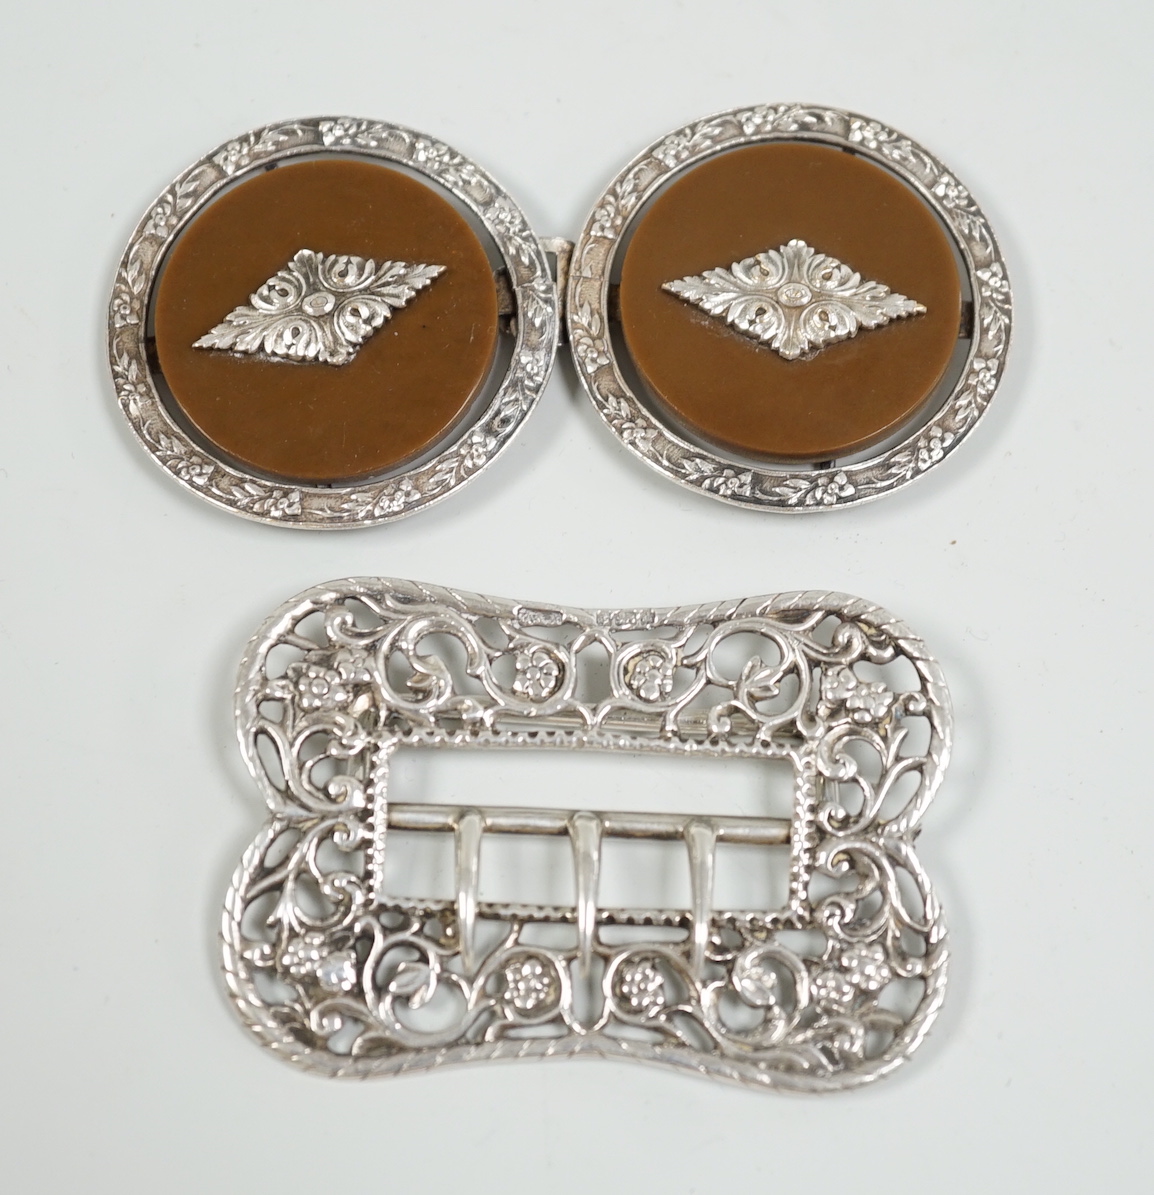 A Victorian silver belt buckle, H & A, Birmingham 1900, and a continental white metal mounted two piece belt buckle                                                                                                         